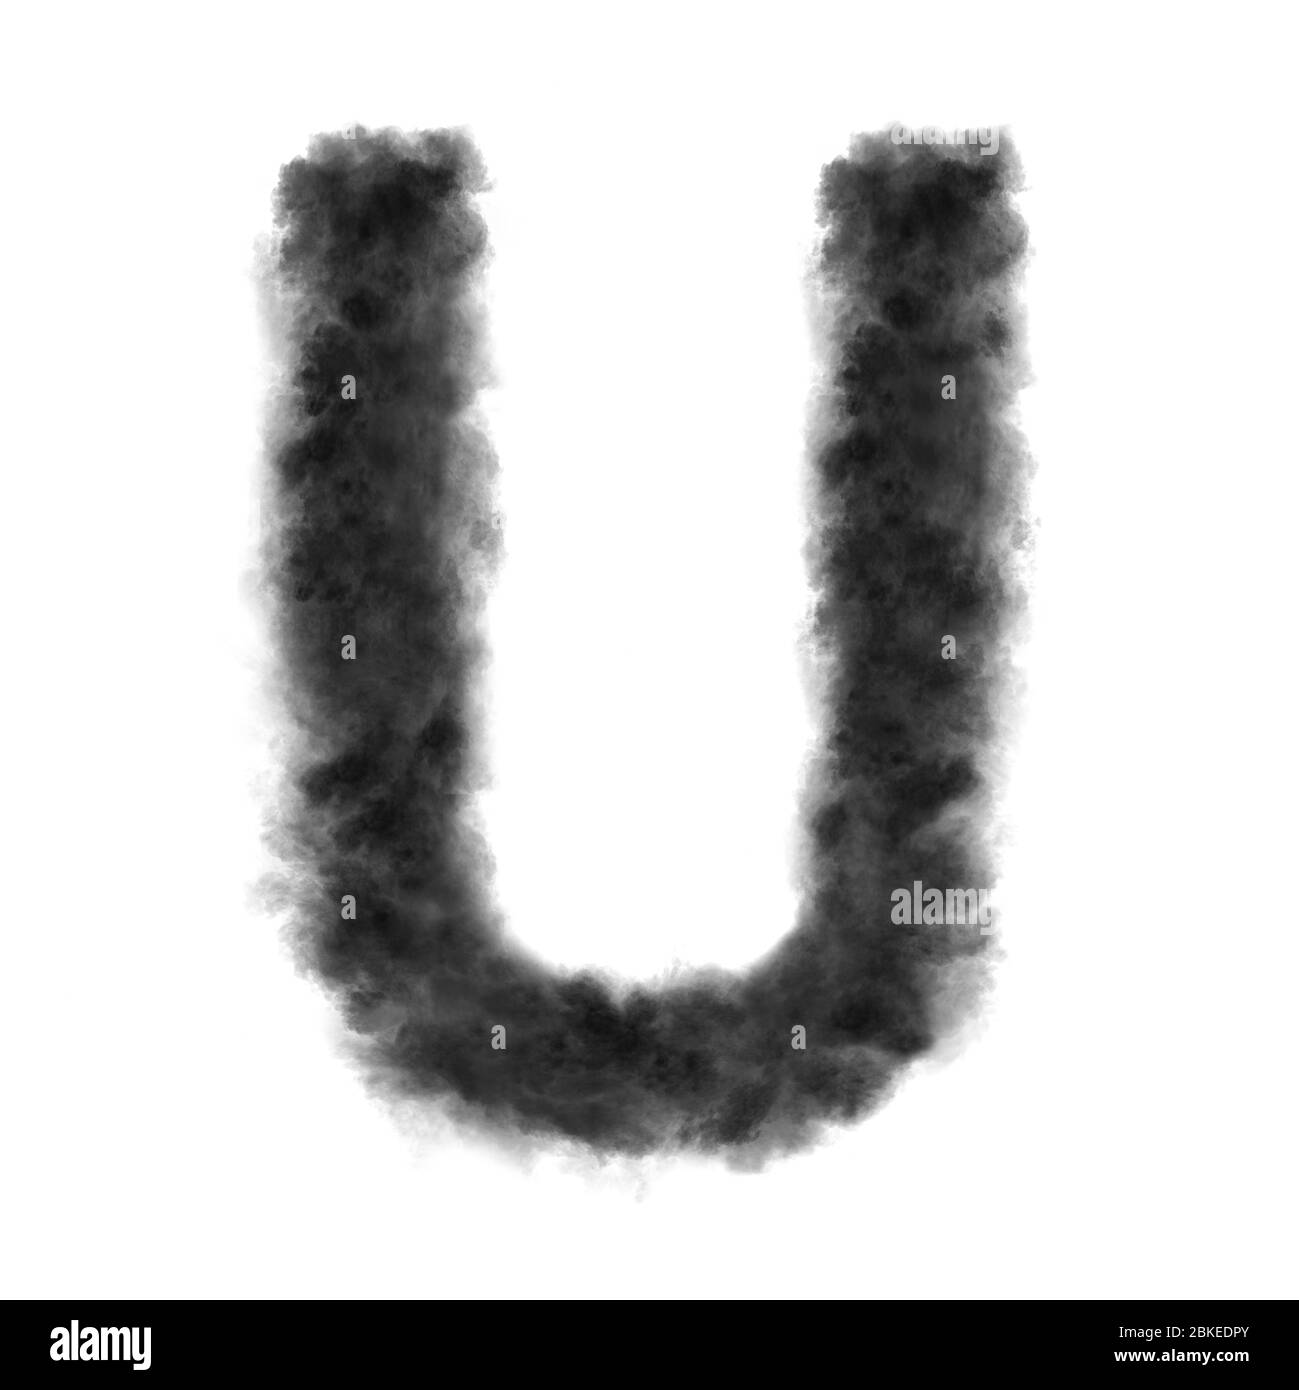 Letter U made from black clouds on a white background. Stock Photo